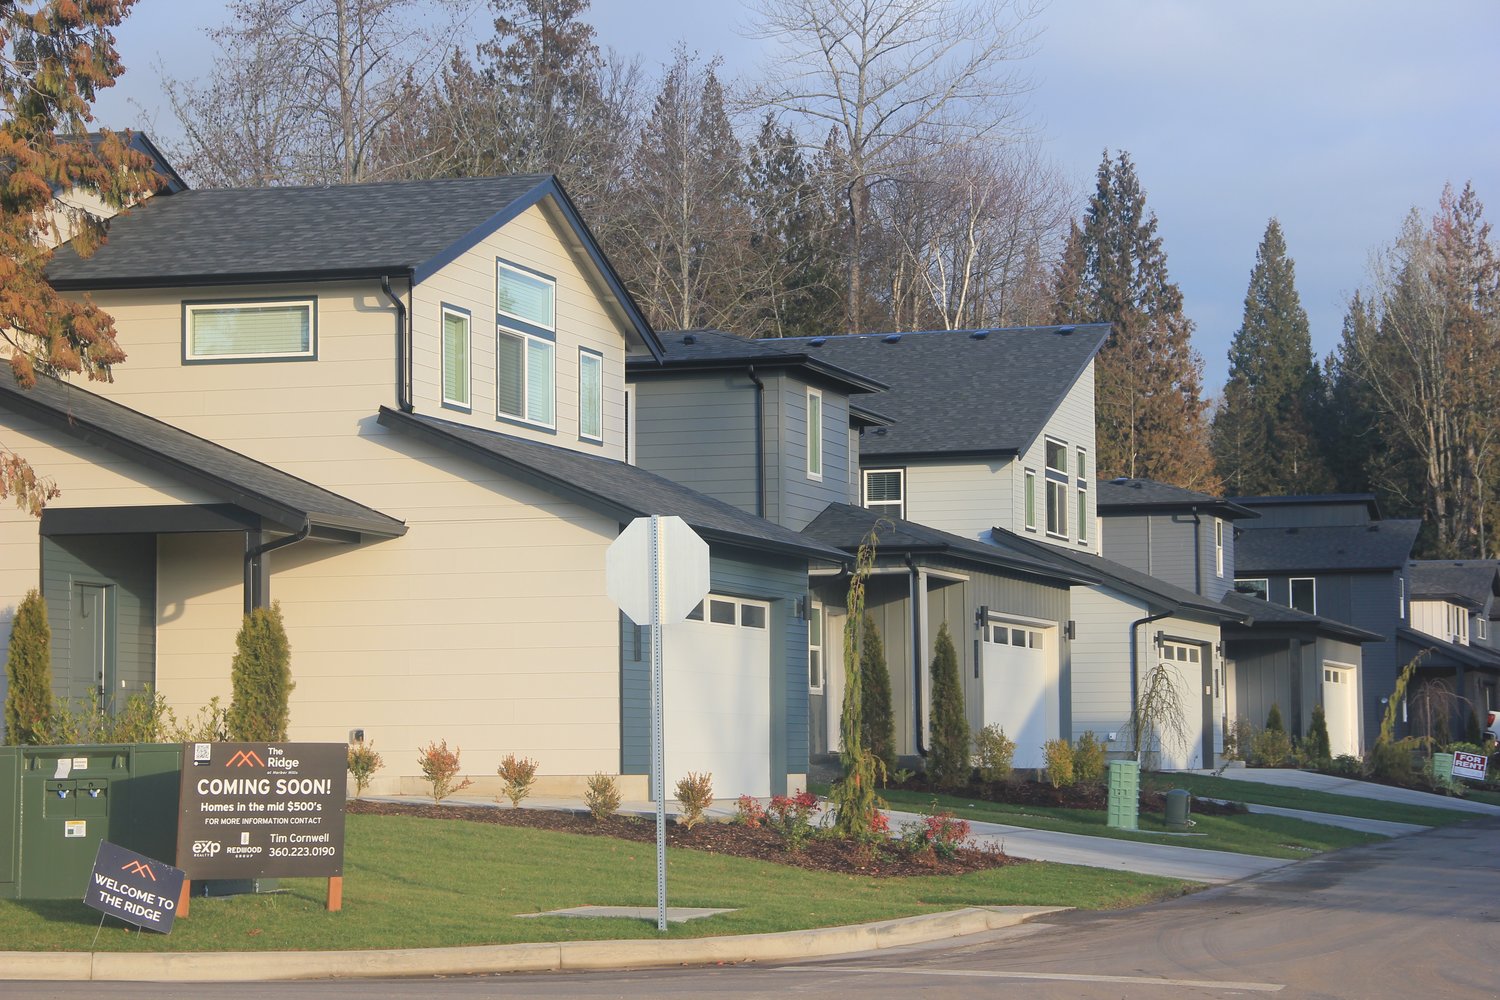 The Ridge at Harbor Hills has over a dozen homes occupied in the east Blaine housing development. The development, expected to be completed in 2025, will have 353 houses between single-family homes and multi-family units.